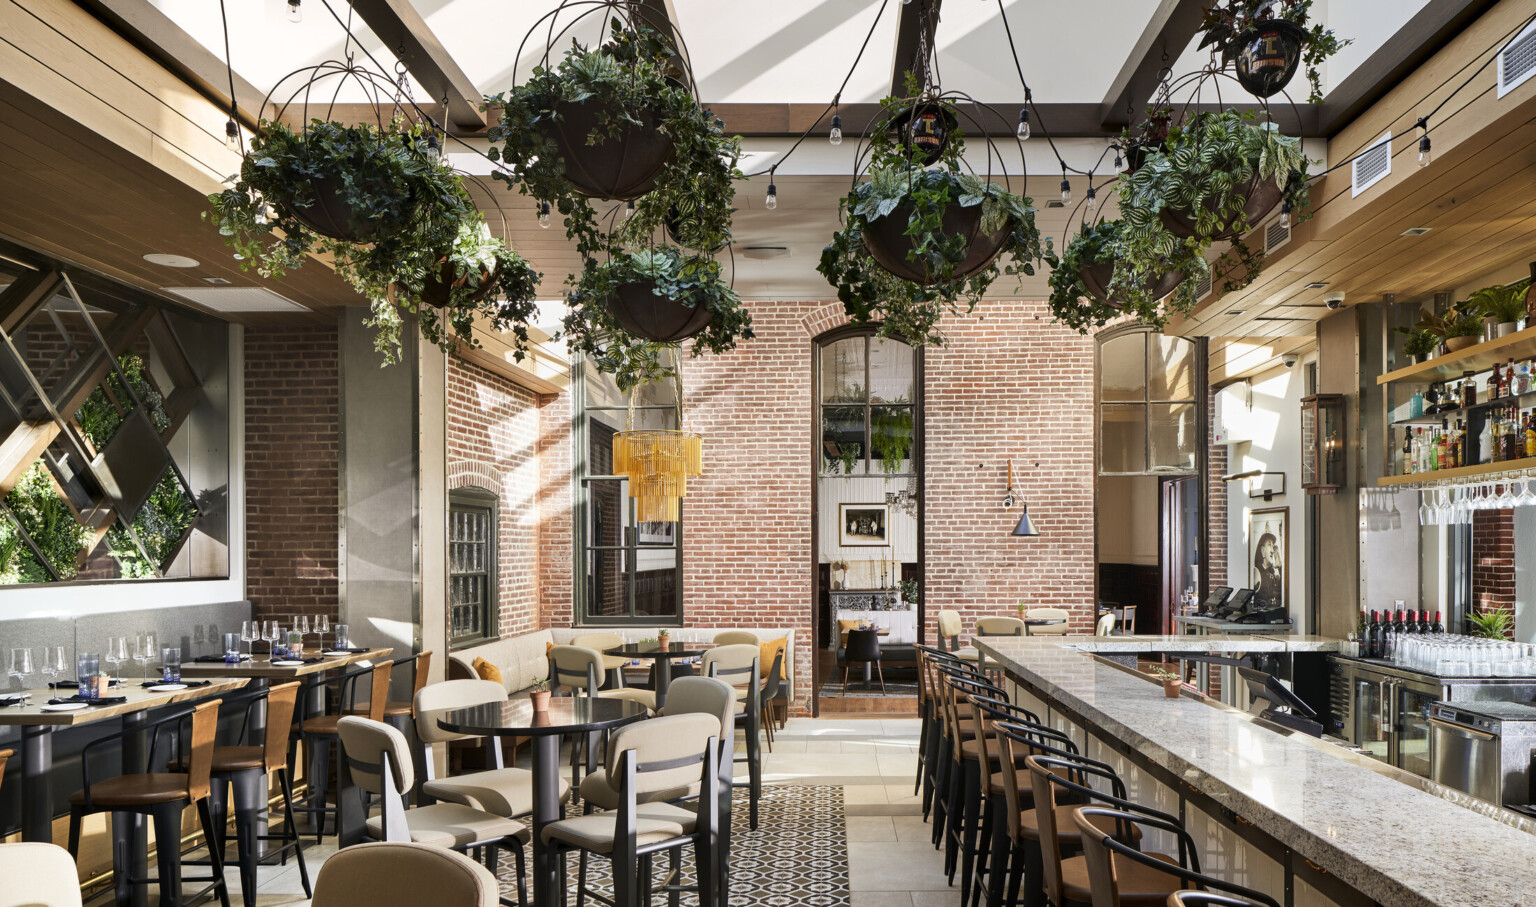 Brick walls, skylight, double-height windows, hanging plants, bar seating, in renovated firehouse